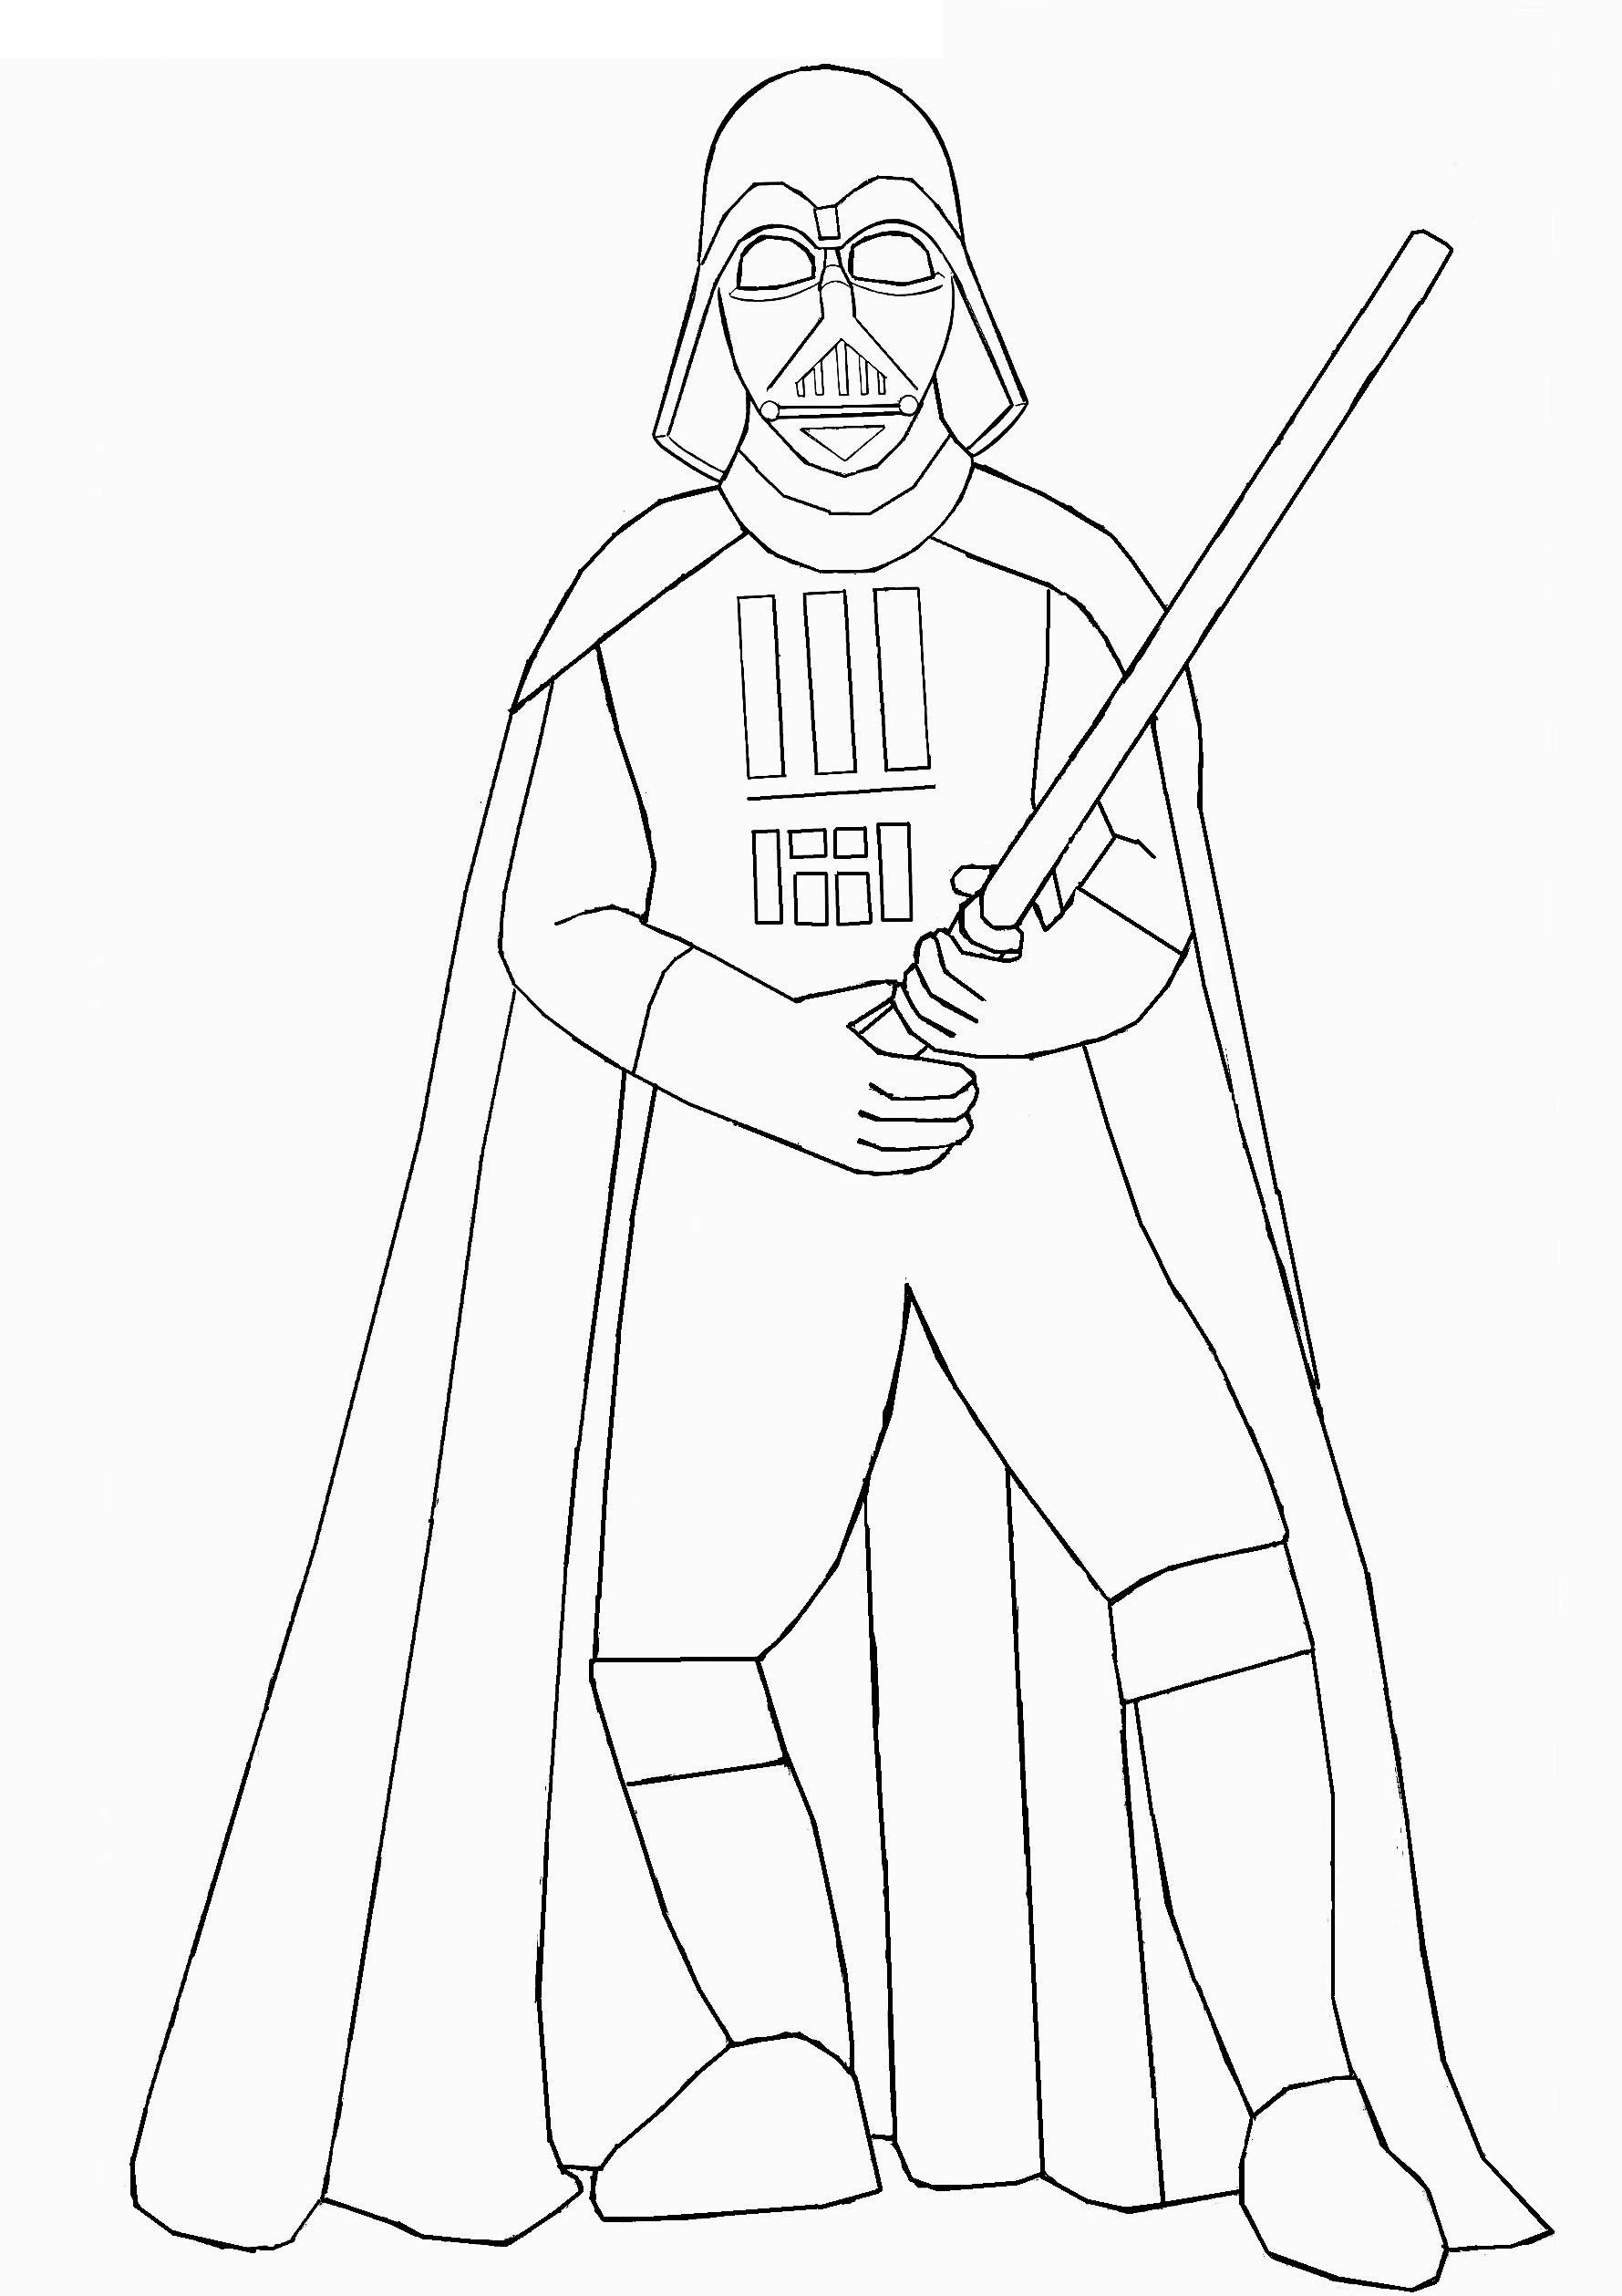 Lightsaber Coloring Pages - Best Coloring Pages For Kids